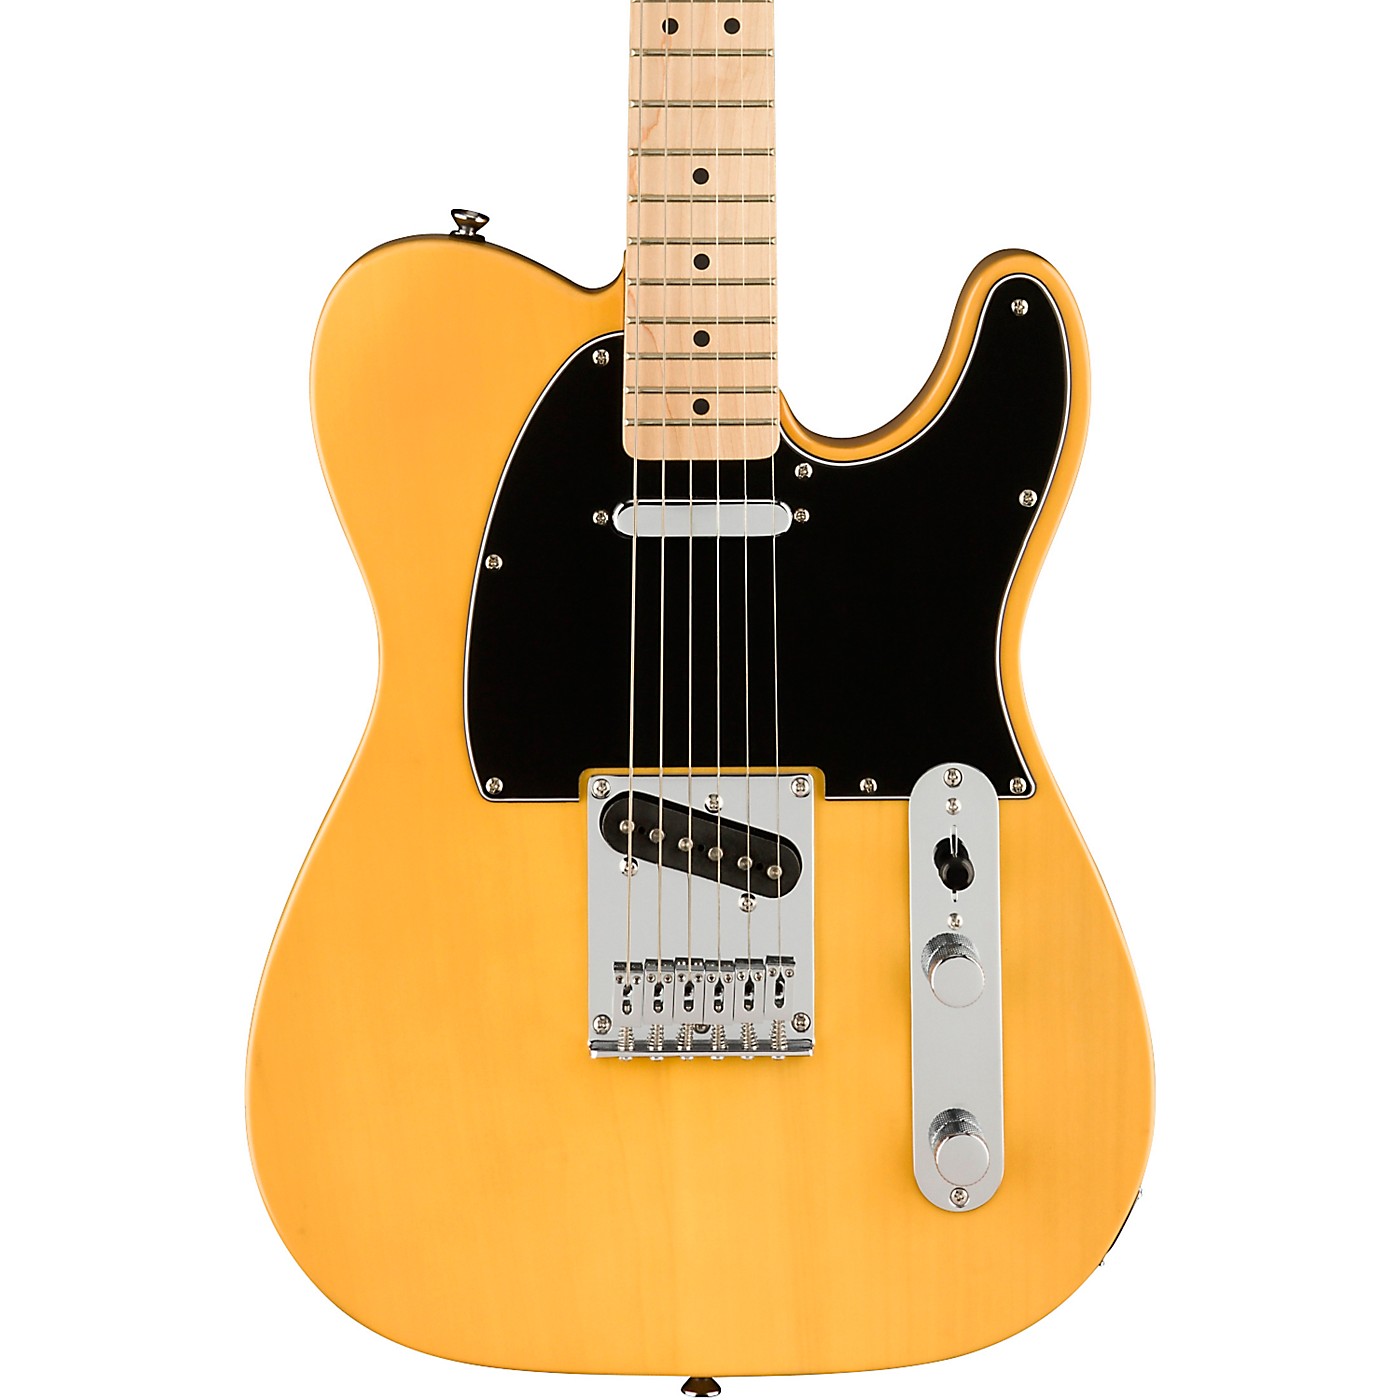 Squier Affinity Series Telecaster Maple Fingerboard Electric Guitar thumbnail